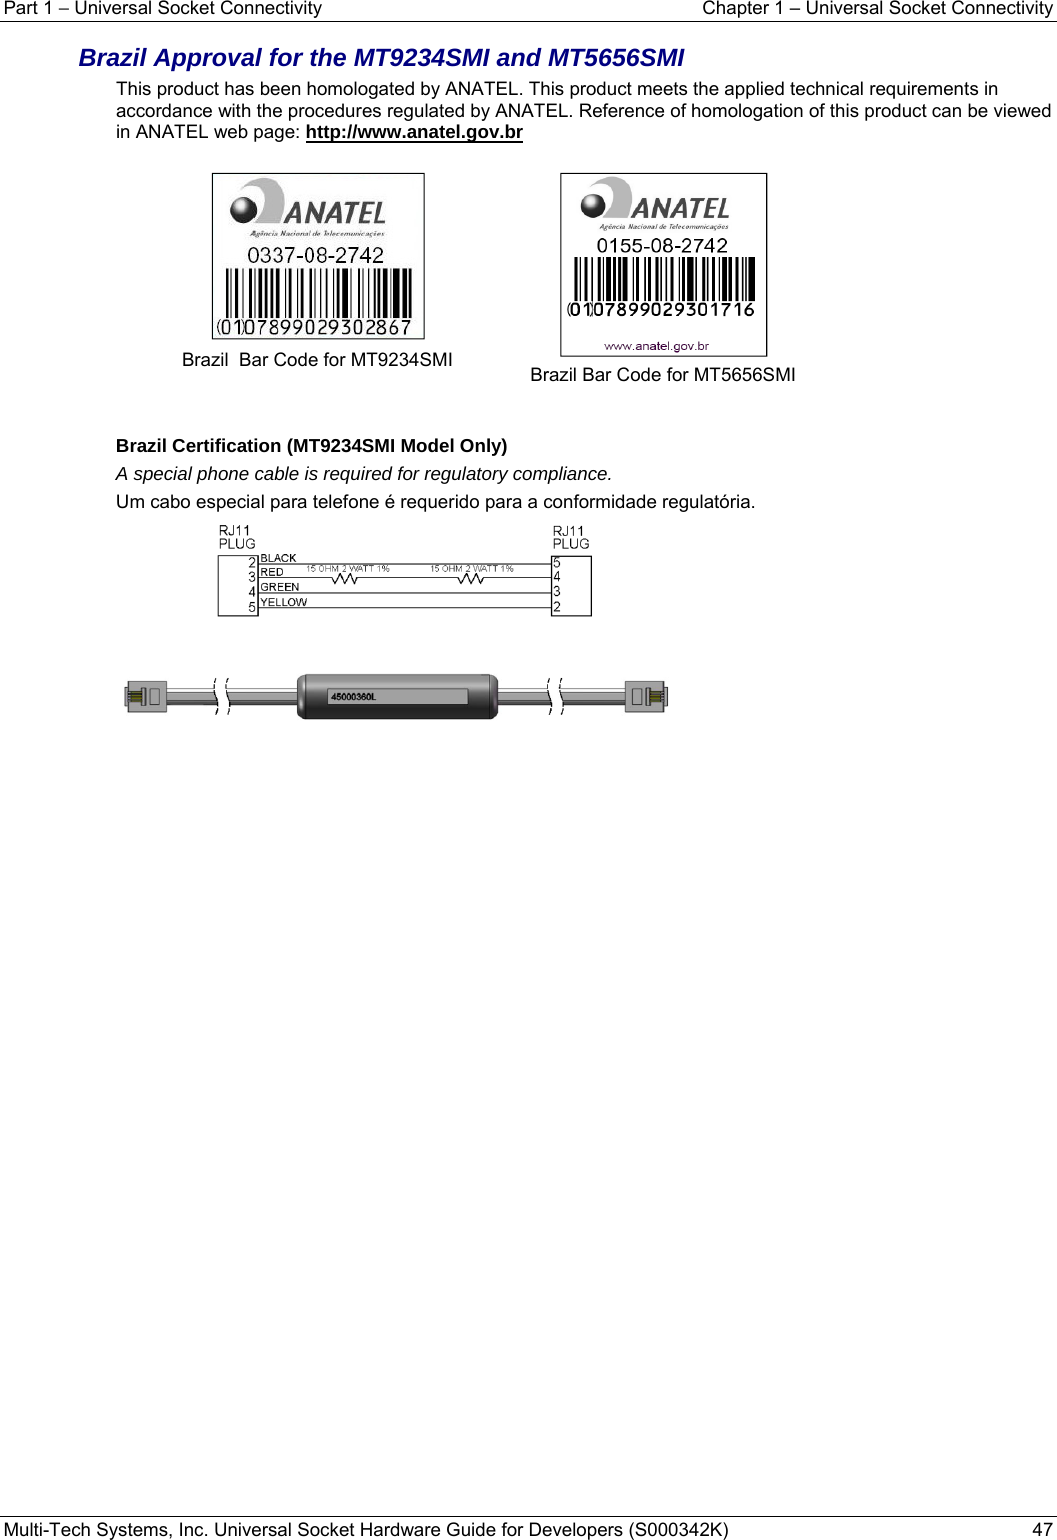 Part 1 − Universal Socket Connectivity    Chapter 1 – Universal Socket Connectivity Multi-Tech Systems, Inc. Universal Socket Hardware Guide for Developers (S000342K)  47  Brazil Approval for the MT9234SMI and MT5656SMI  This product has been homologated by ANATEL. This product meets the applied technical requirements in accordance with the procedures regulated by ANATEL. Reference of homologation of this product can be viewed in ANATEL web page: http://www.anatel.gov.br    Brazil  Bar Code for MT9234SMI   Brazil Bar Code for MT5656SMI   Brazil Certification (MT9234SMI Model Only)  A special phone cable is required for regulatory compliance. Um cabo especial para telefone é requerido para a conformidade regulatória.      